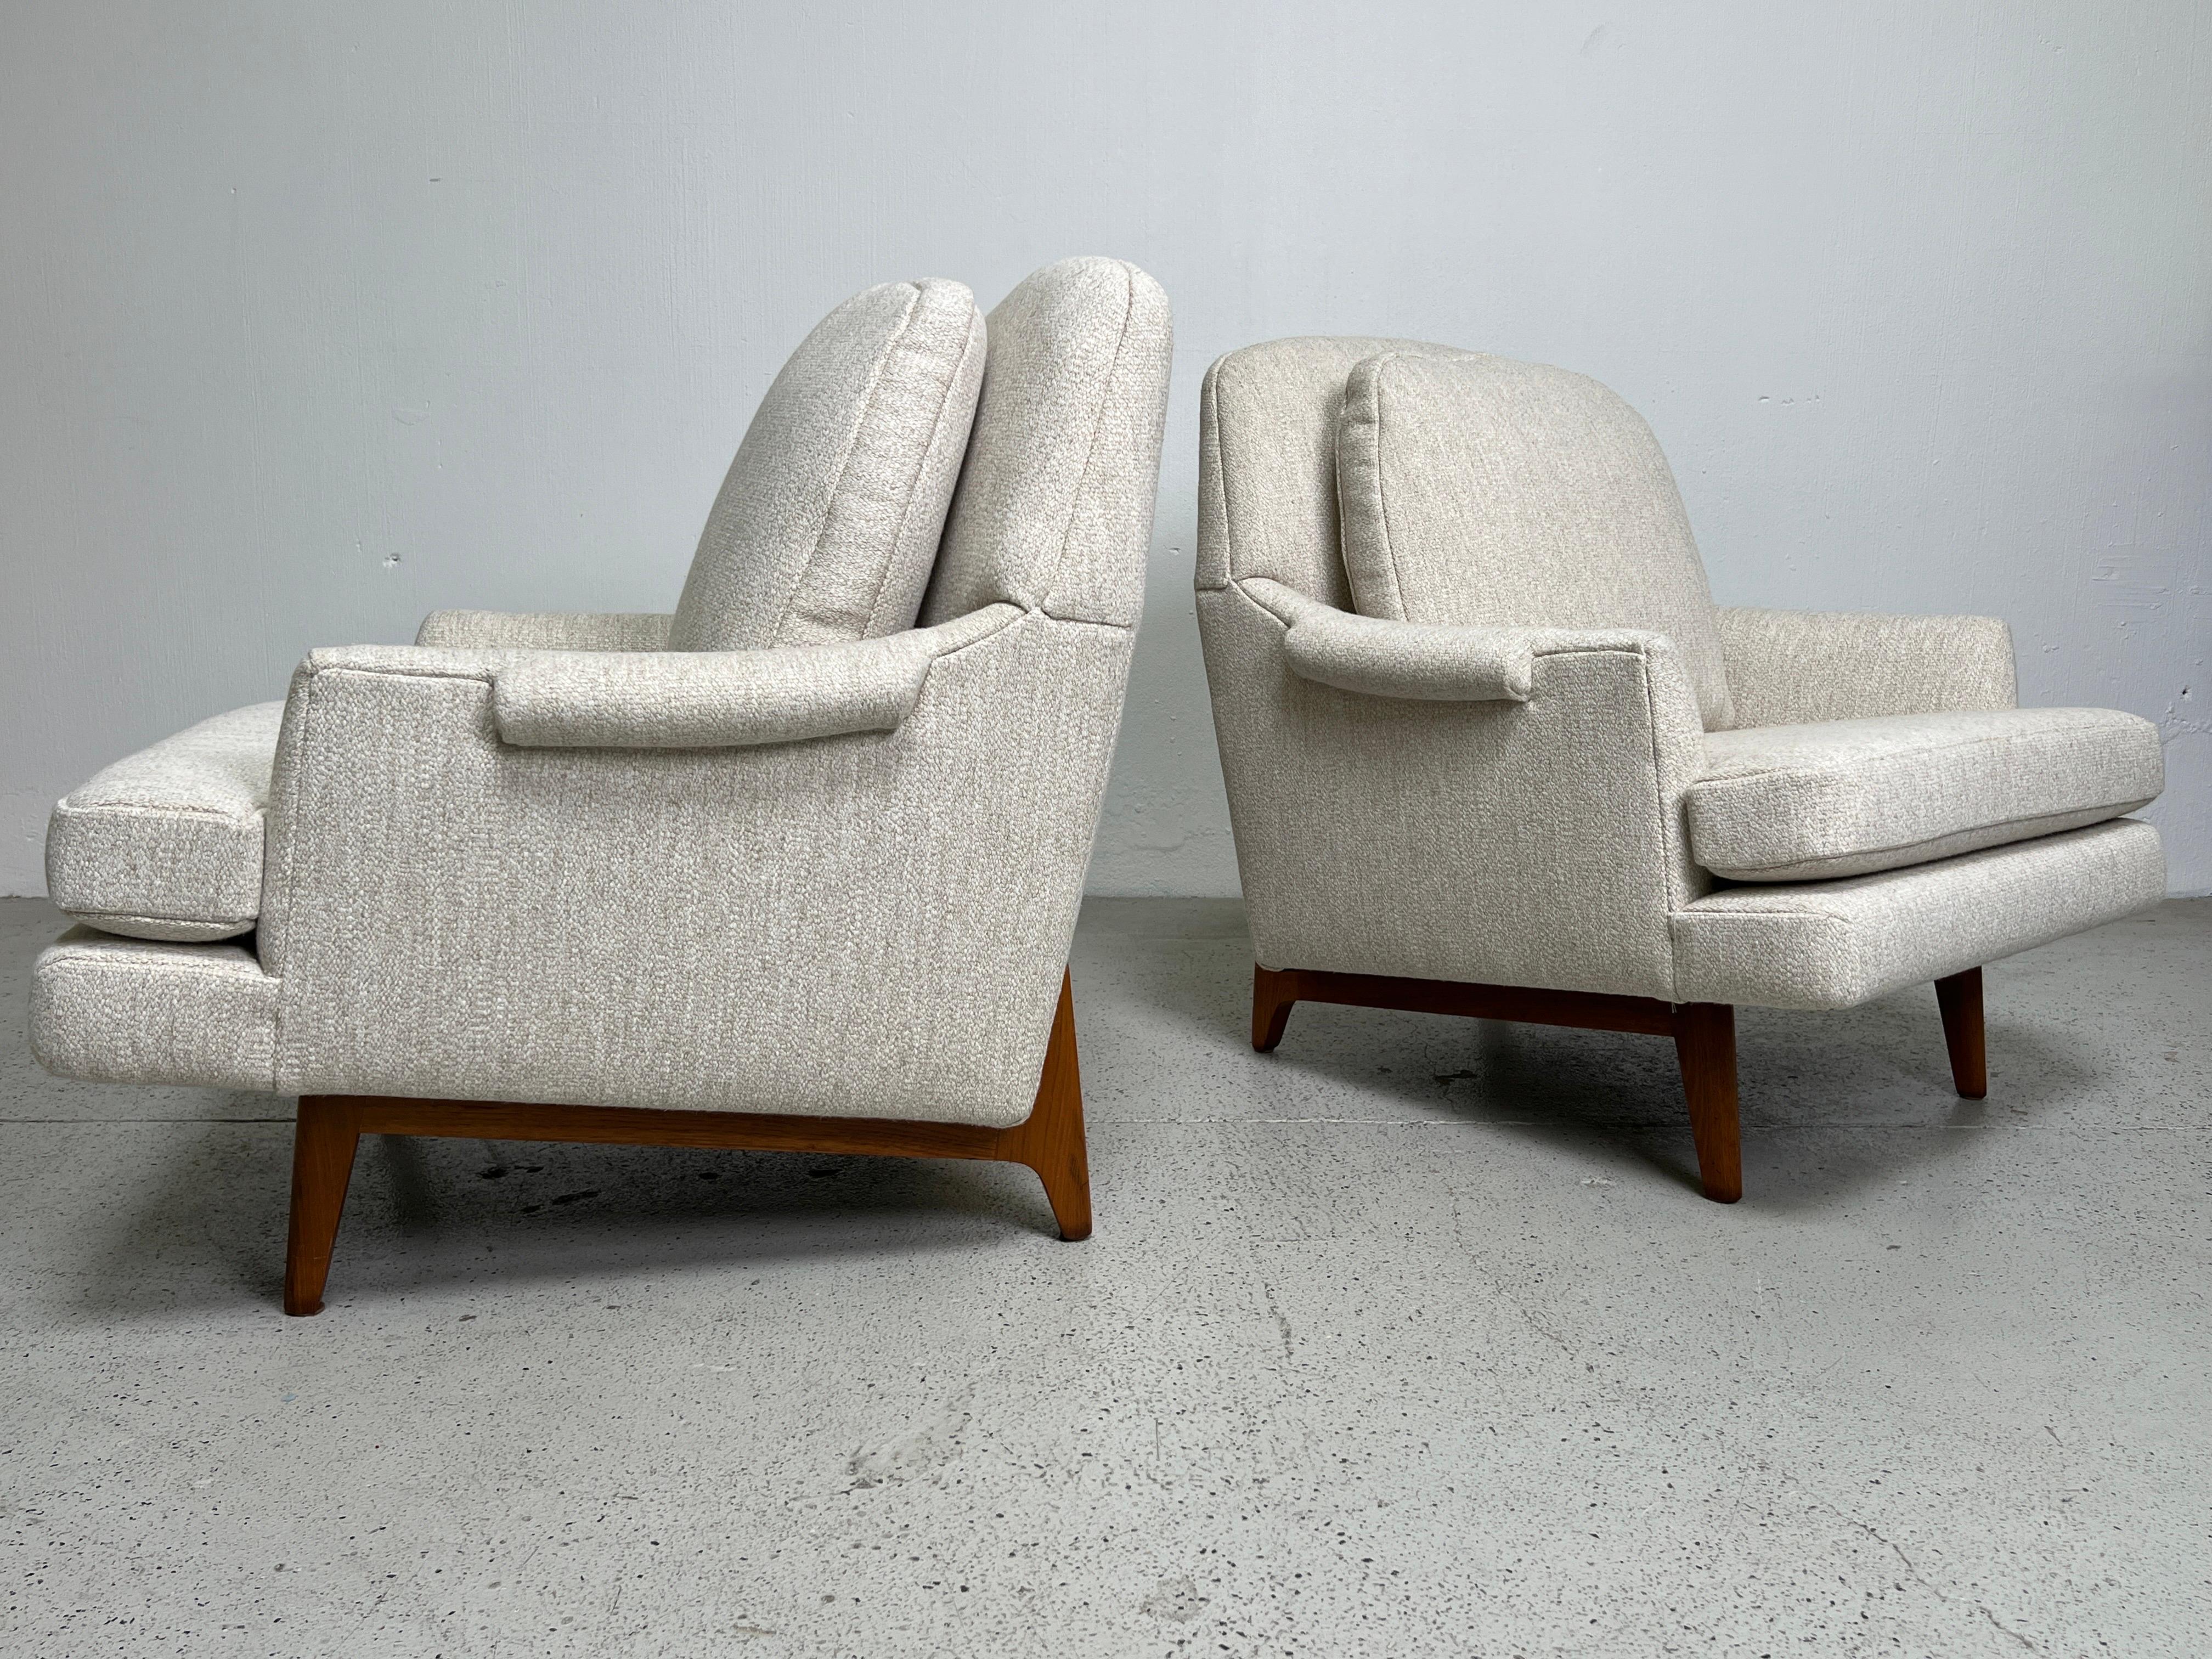 A pair of Dunbar lounge chairs model 484 designed by Roger Sprunger. Fully restored and reupholstered in Holly Hunt fabric.